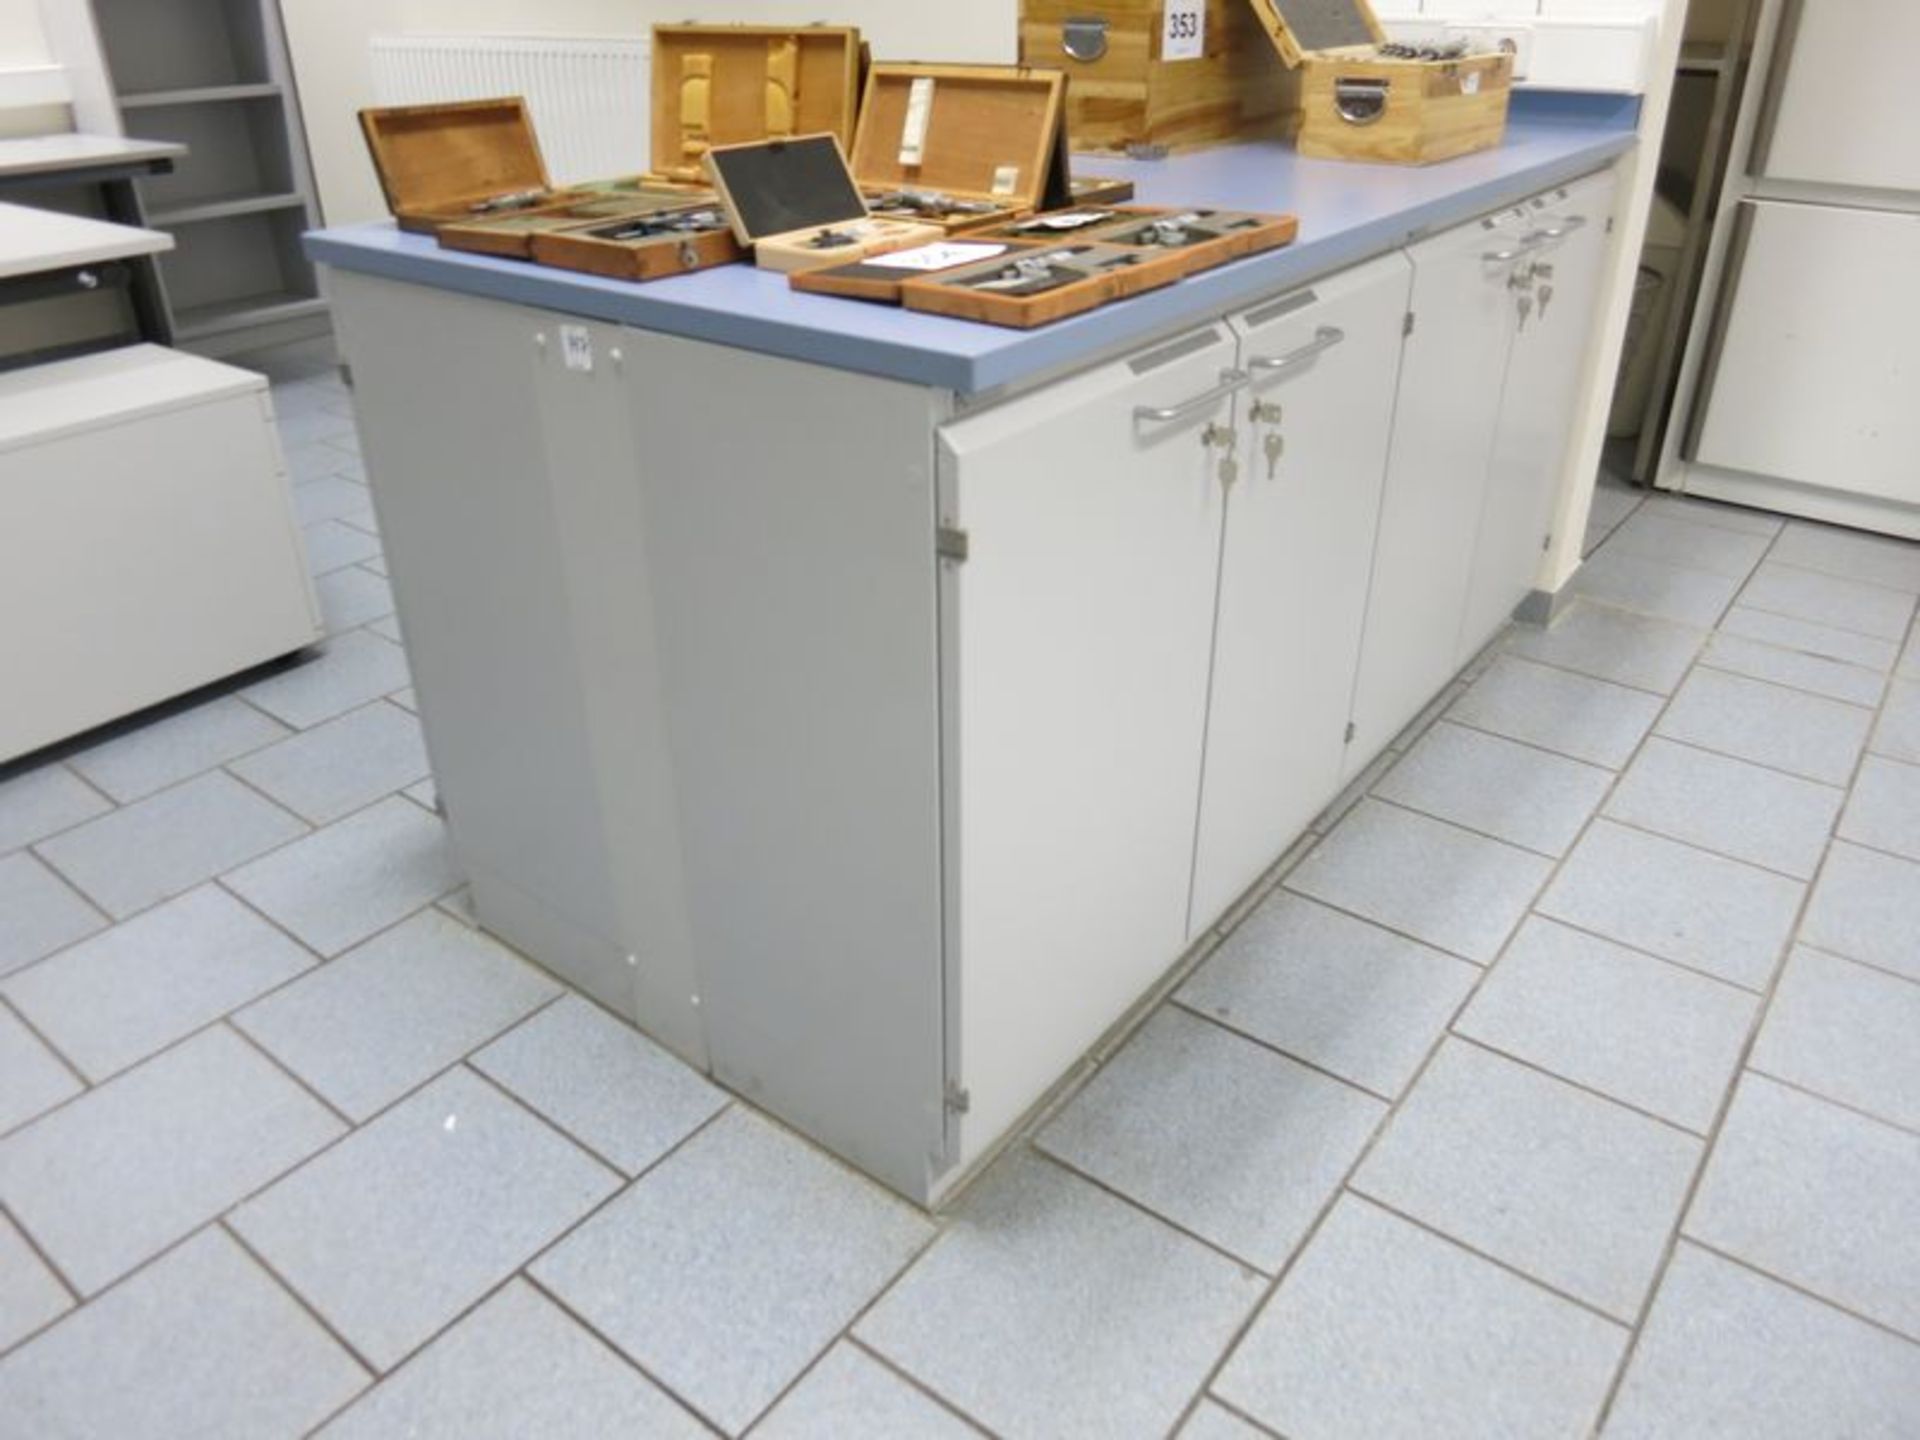 Lot of Laboratory furniture, counters, sinks, tables, wall cabinets  [Location: Bldg 6.] - Image 4 of 7